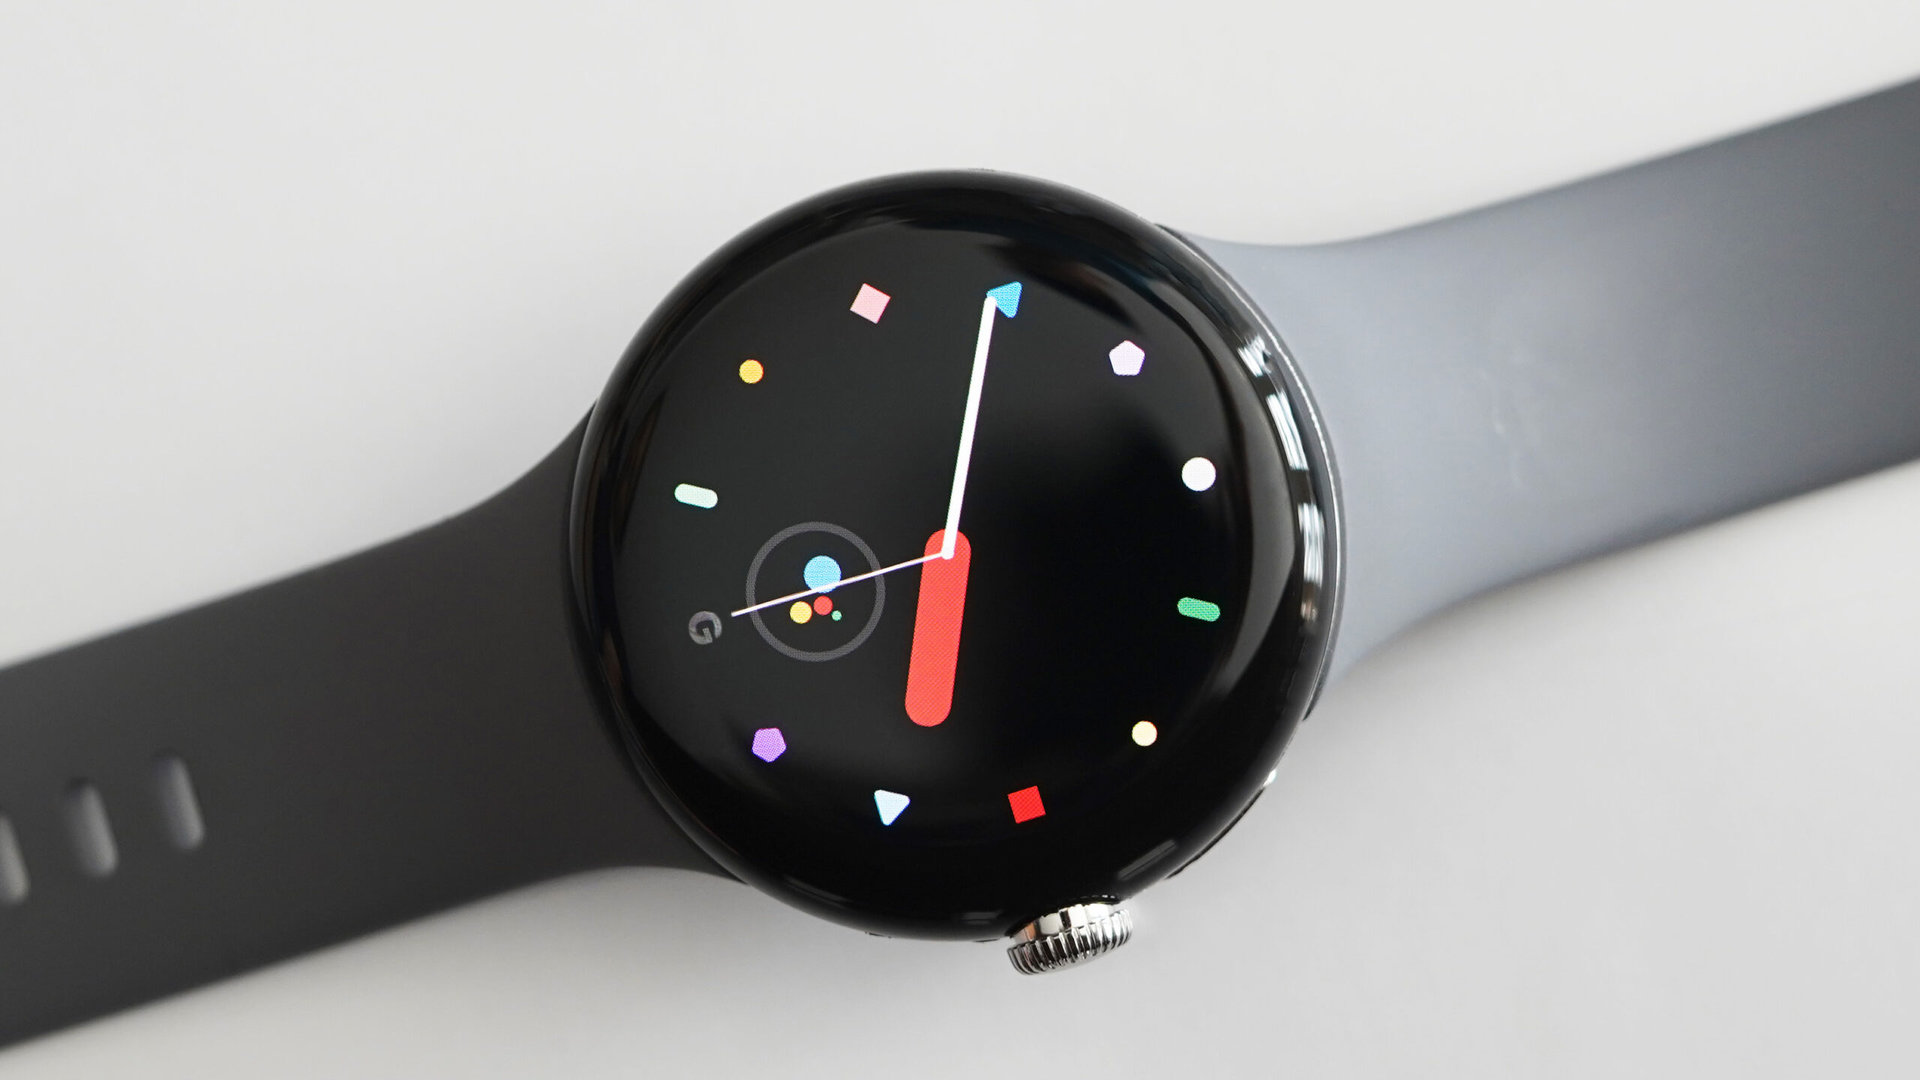 A Google Pixel Watch displays the Shapes watch face.